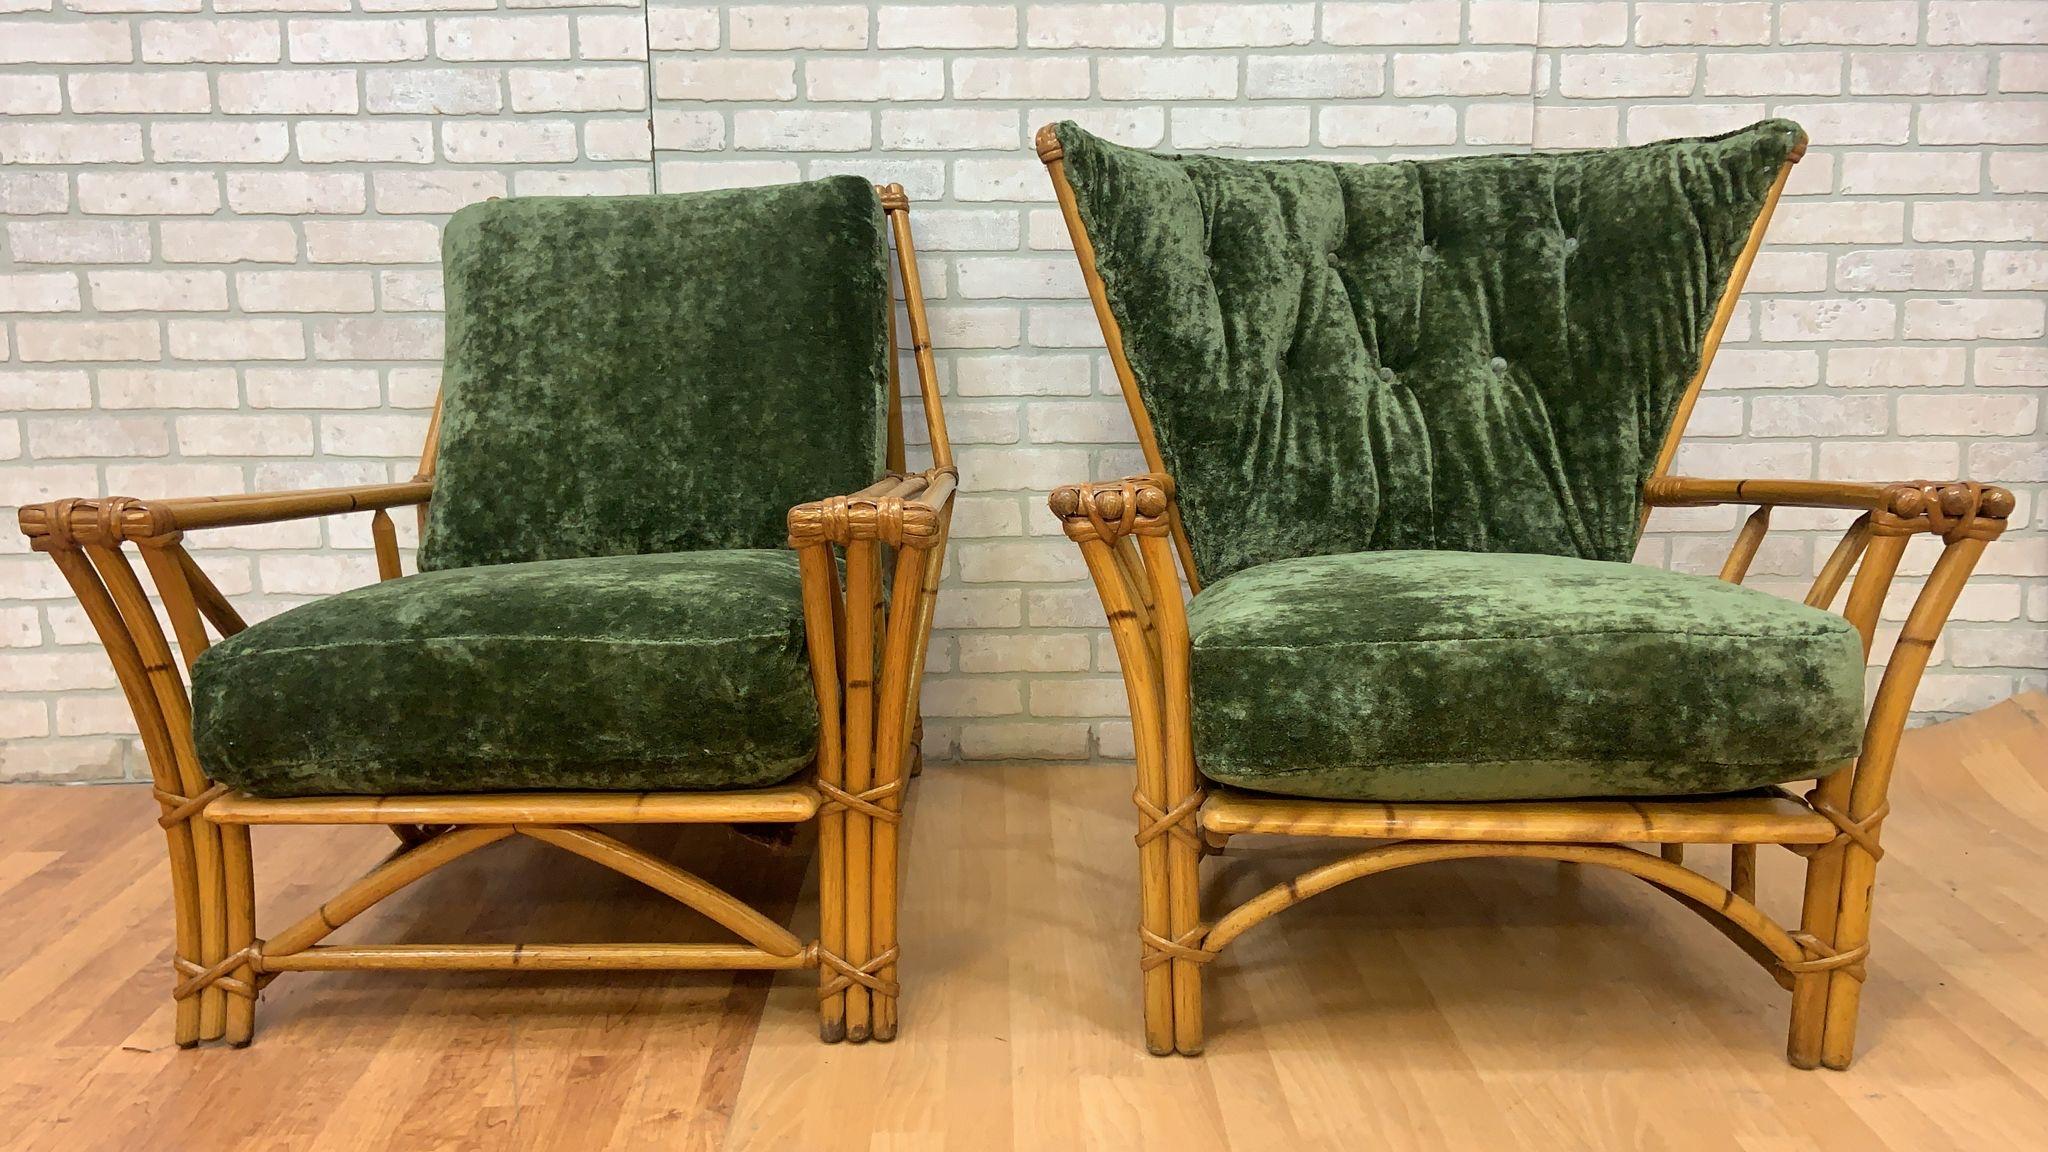 Vintage Mid Century Modern Rare Heywood Wakefield Ashcraft Rattan Lounge Chairs Newly Upholstered in a Deep Emerald Green Velvet - Set of 2 

The Vintage Mid Century Modern Rare Heywood Wakefield Ashcraft Rattan Lounge Chairs, newly upholstered in a